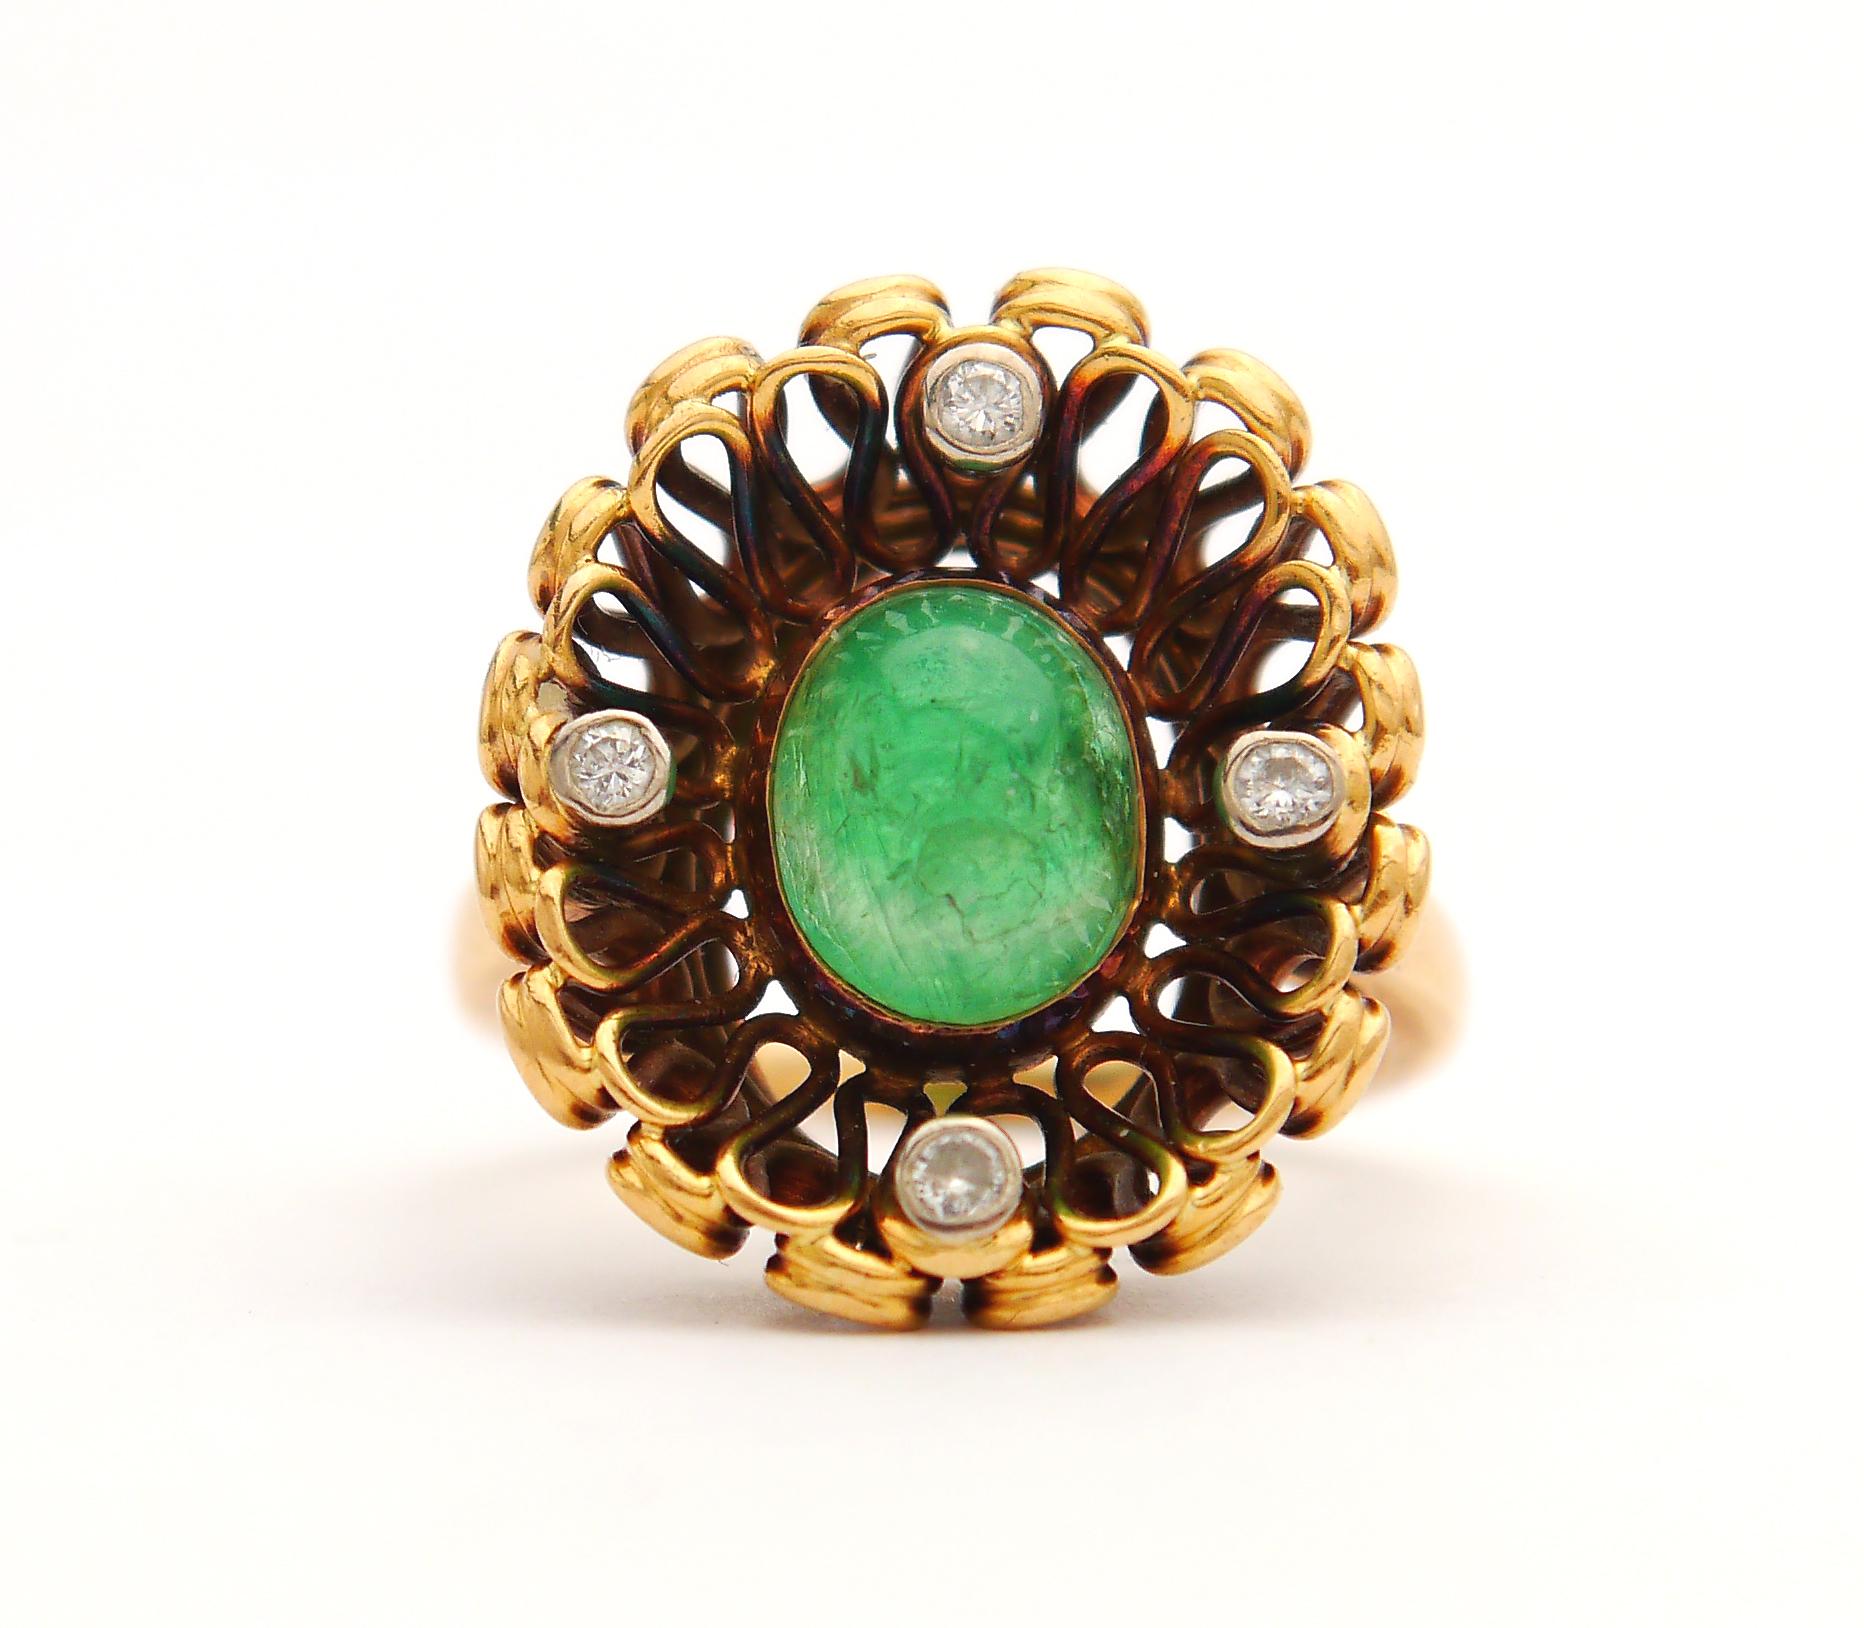 A ring with medium green cabochon cut natural Emerald  bezel set in wired floret in solid 18K Gold accented with four diamond cut Diamonds arranged in cross formation.

Crown is 20 mm x 17 mm. The facial side of the crown was artificially patinated